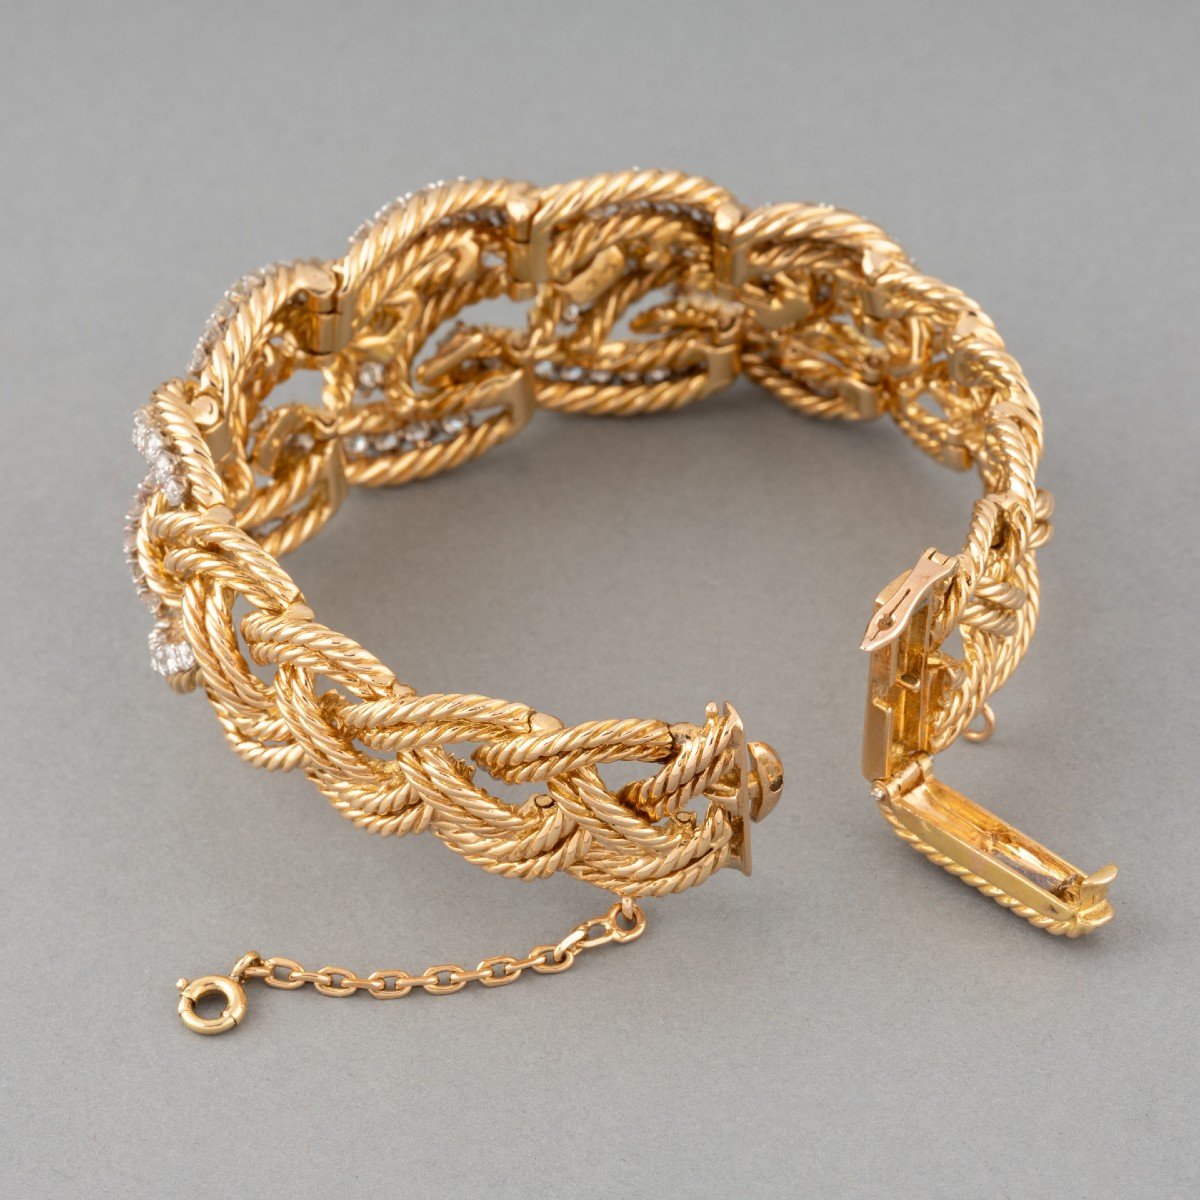 Vintage French Bracelet In Gold And 9 Carat Diamonds-photo-1